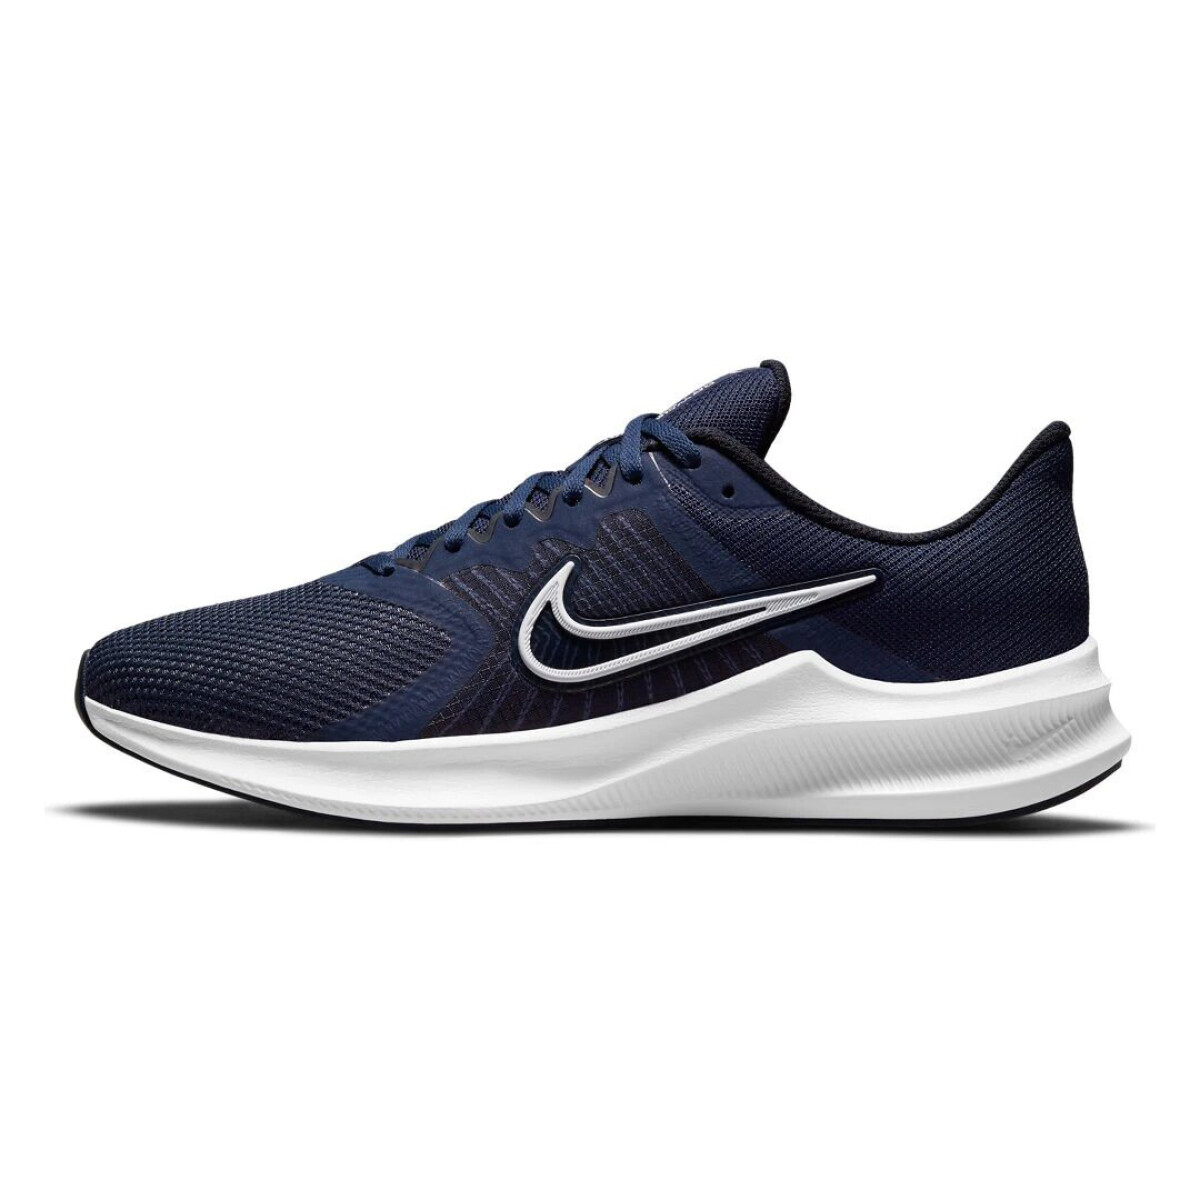 Champion Nike Running Hombre Downshifter 11 - Color Único 